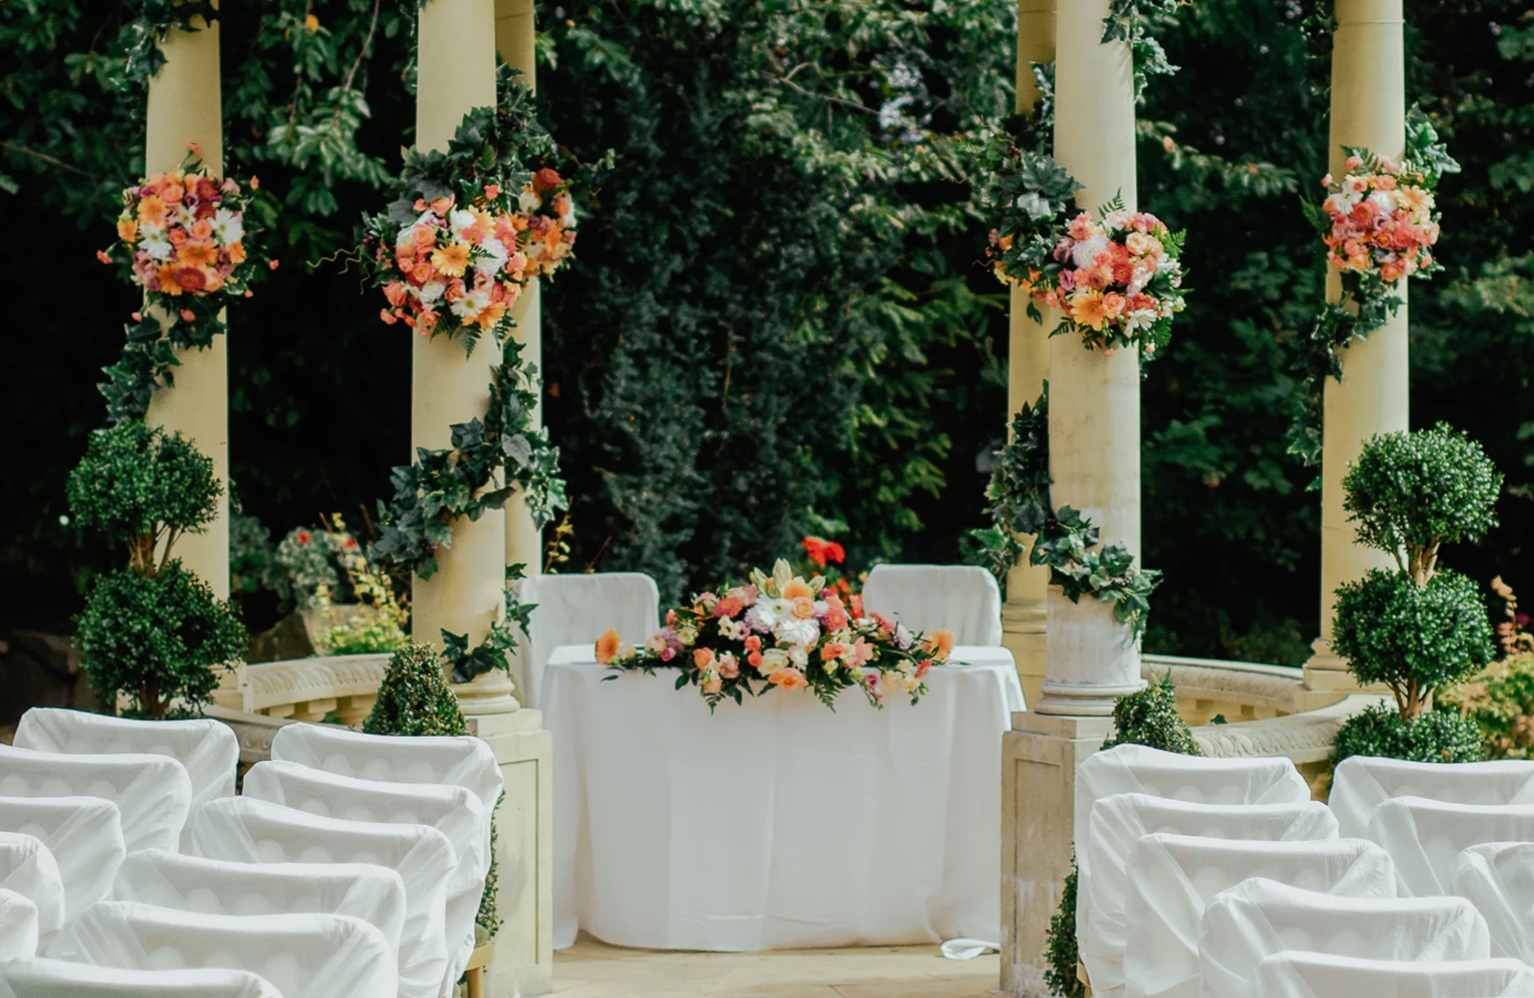 wedding florals - How to Repurpose Your Wedding Decorations After the Big Day